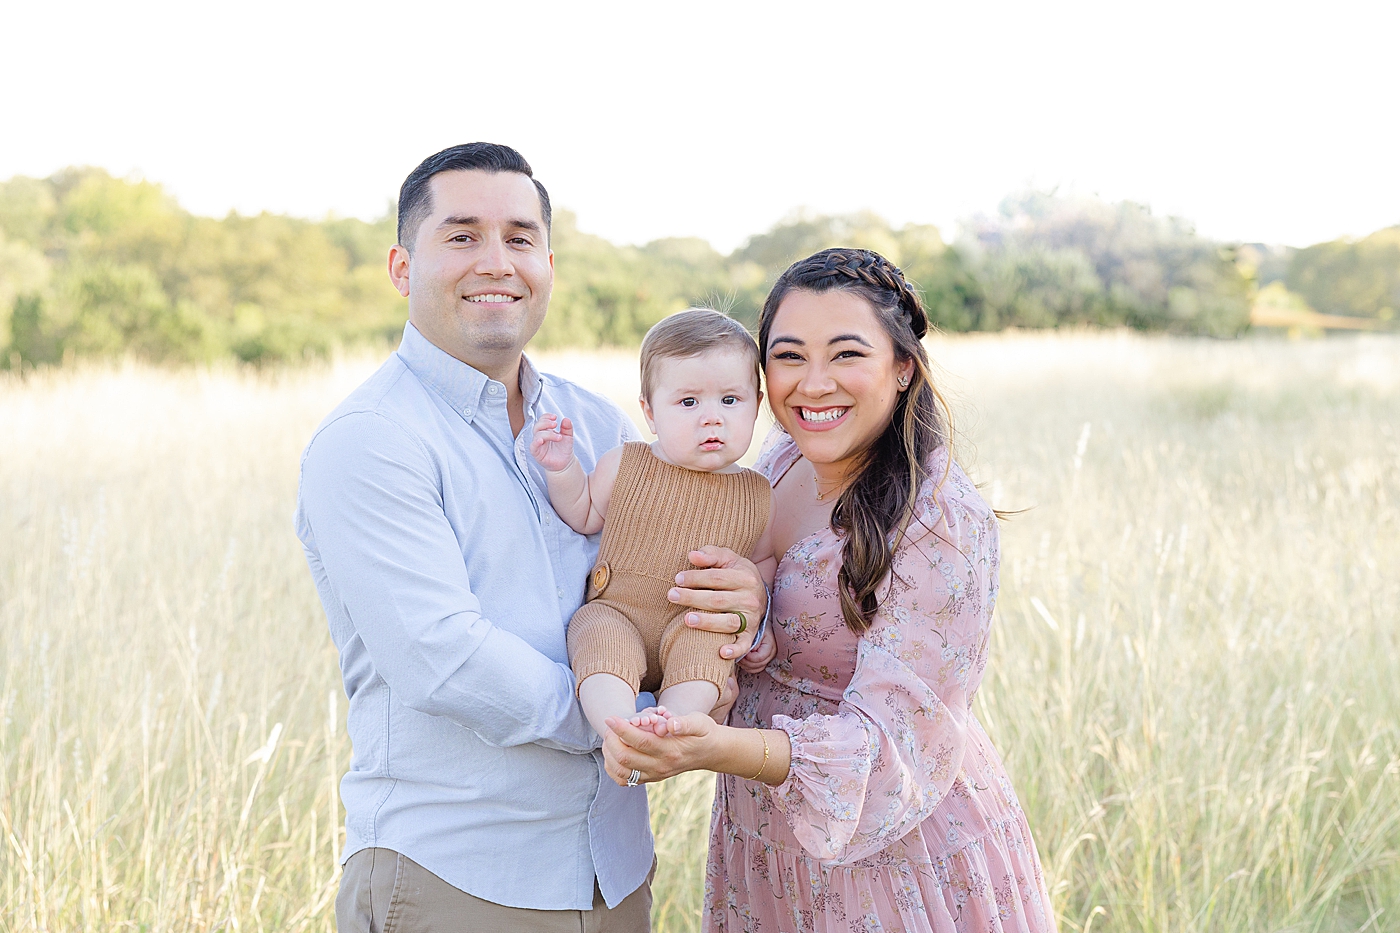 Family of three in a field during Six Month Milestone Session | Image by Sana Ahmed Photography